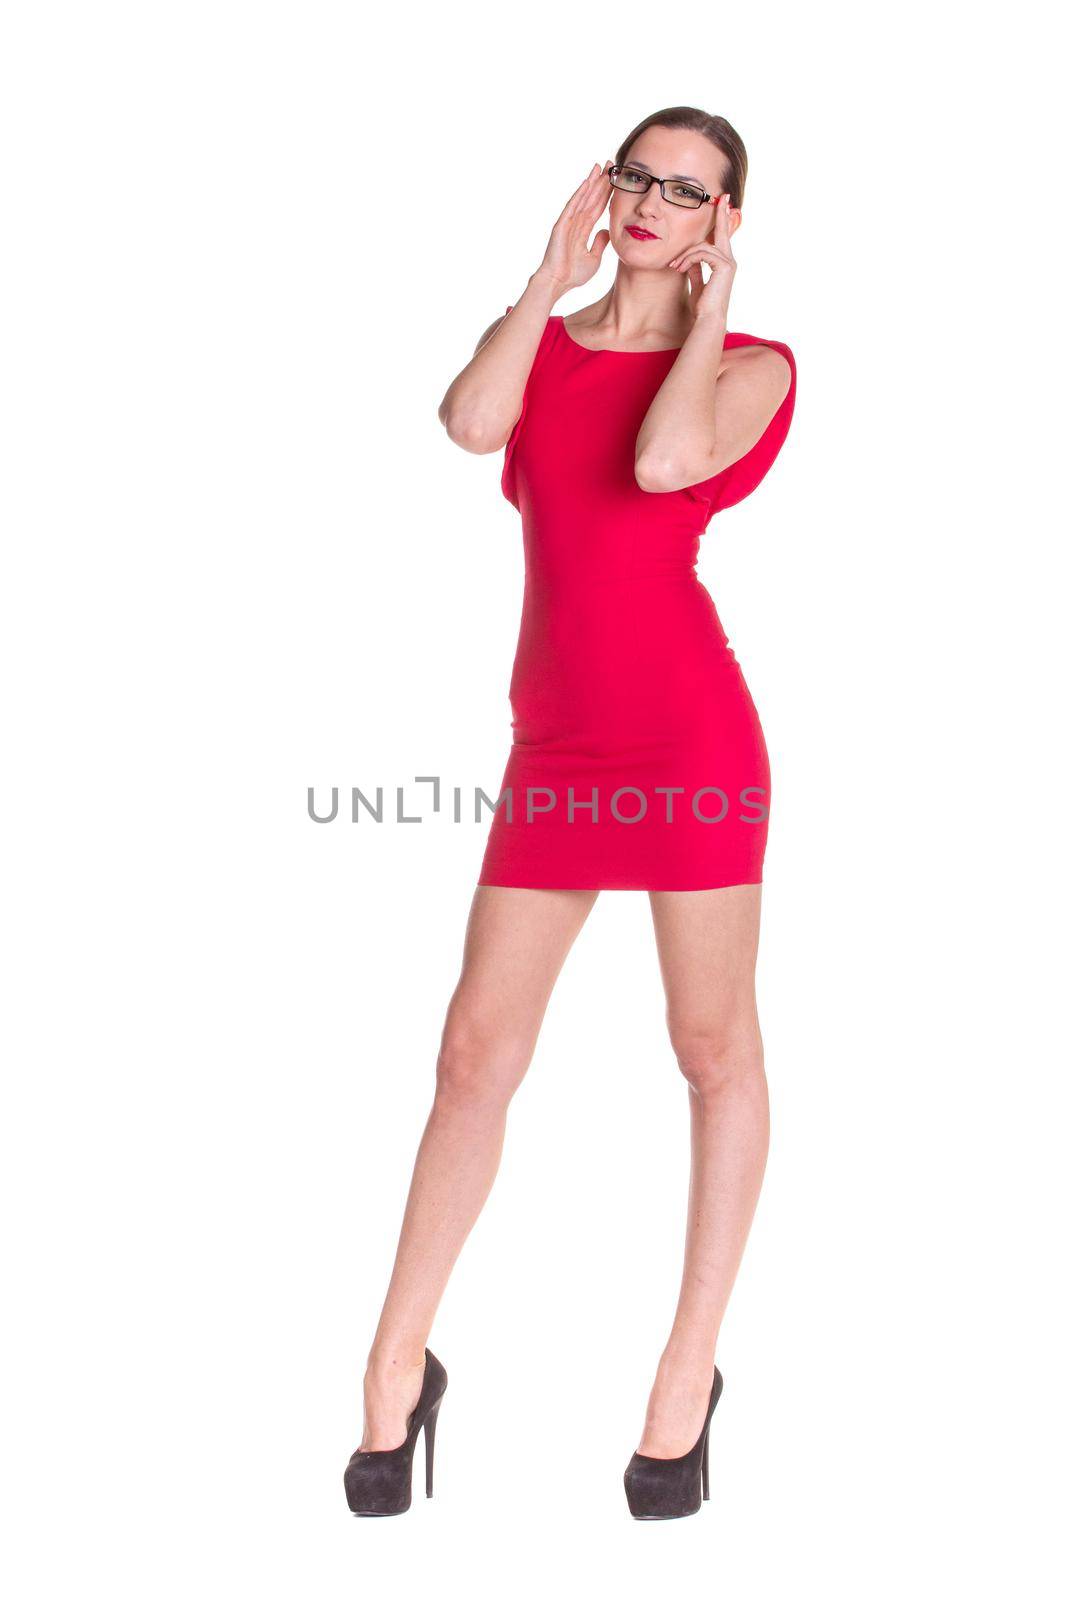 Lady in red posing with glasses, isolated on white